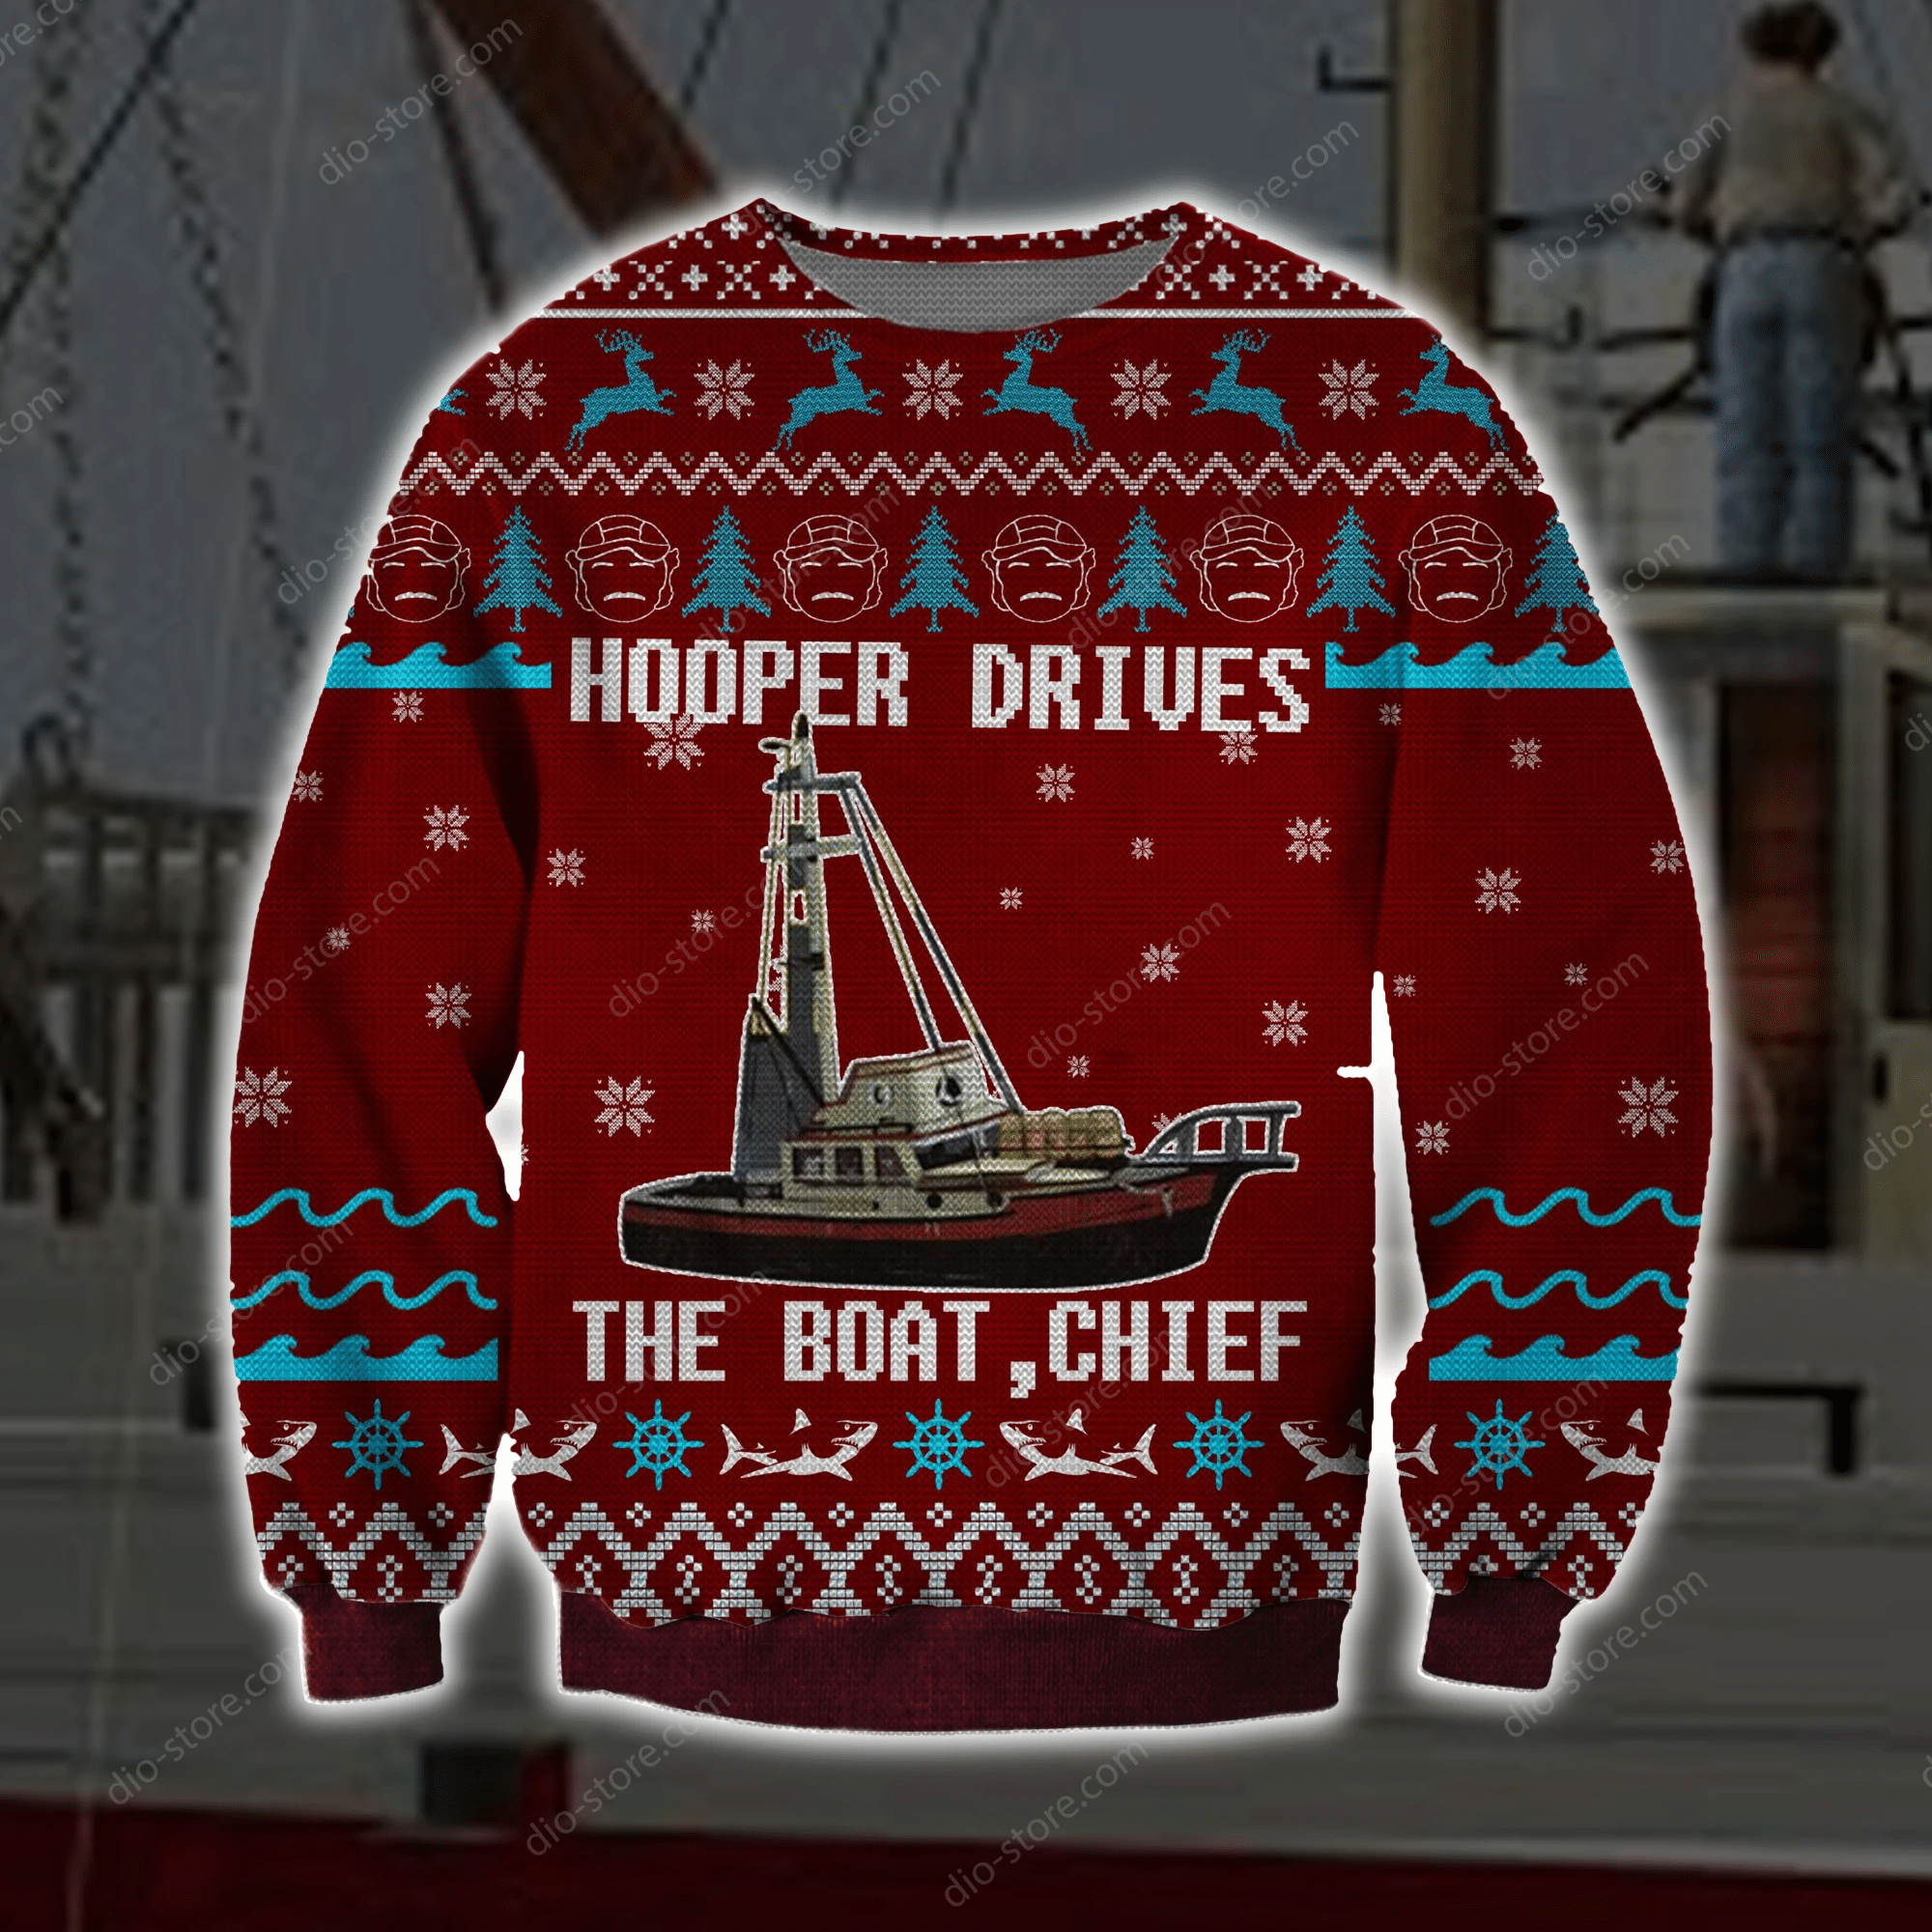 Hooper Drives Knitting Pattern 3D Print Ugly Christmas Sweater